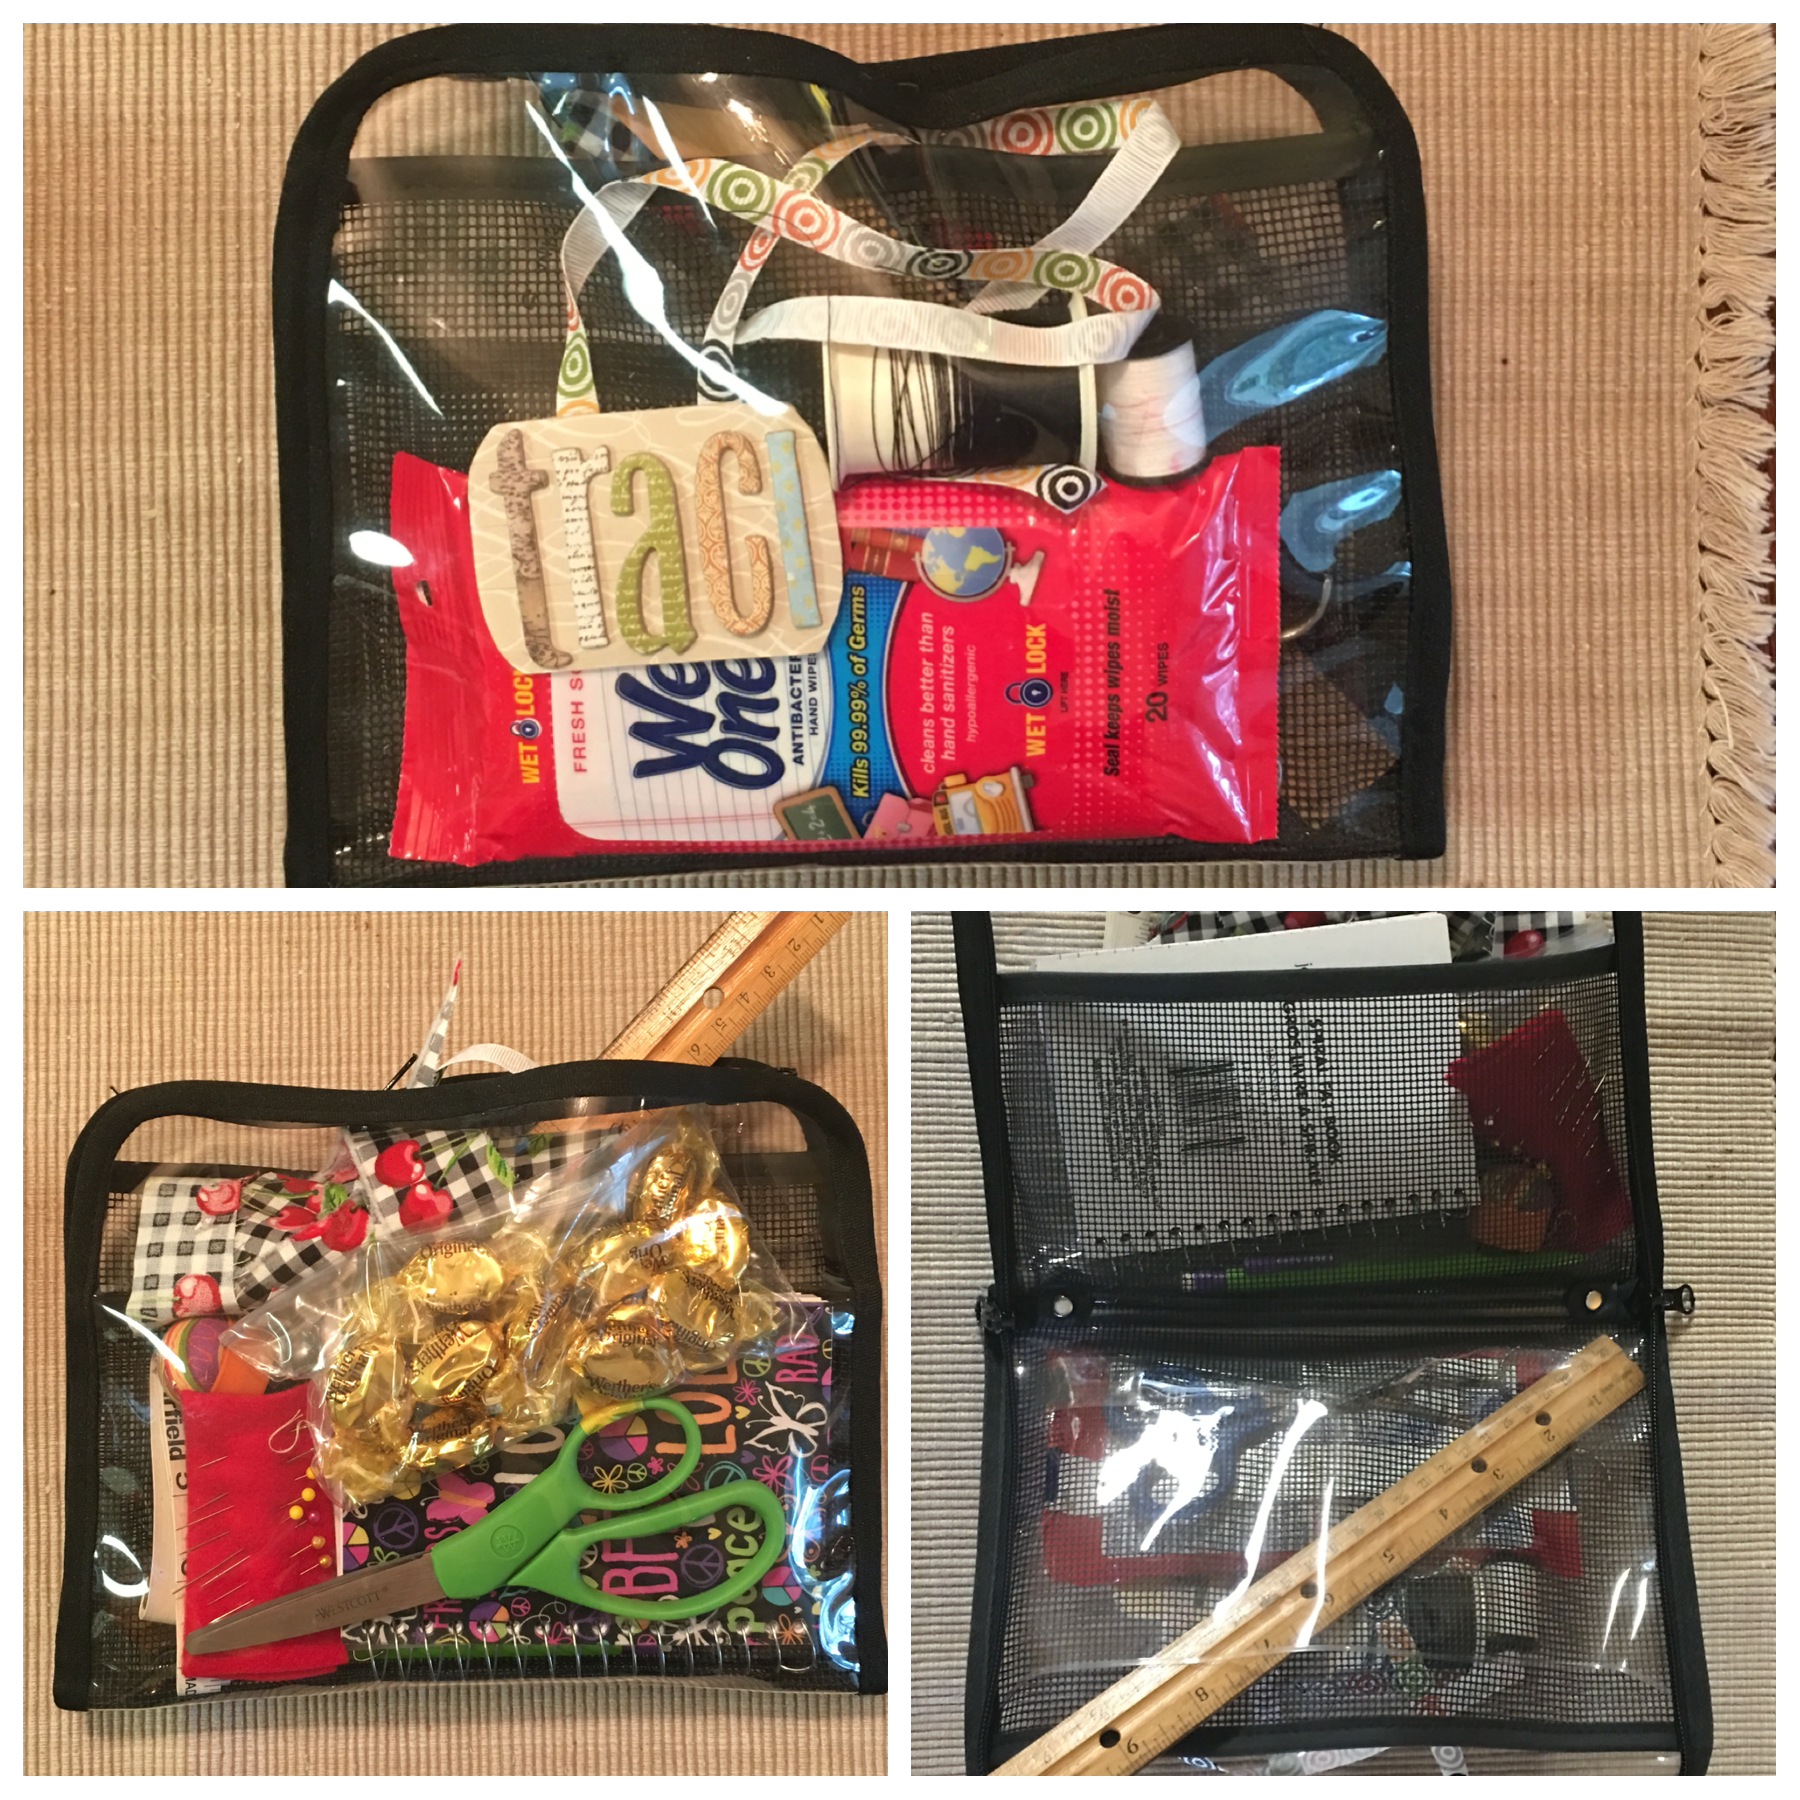 To-Go Fiber Art Kit With Scissors, A Ruler, And Other Materials